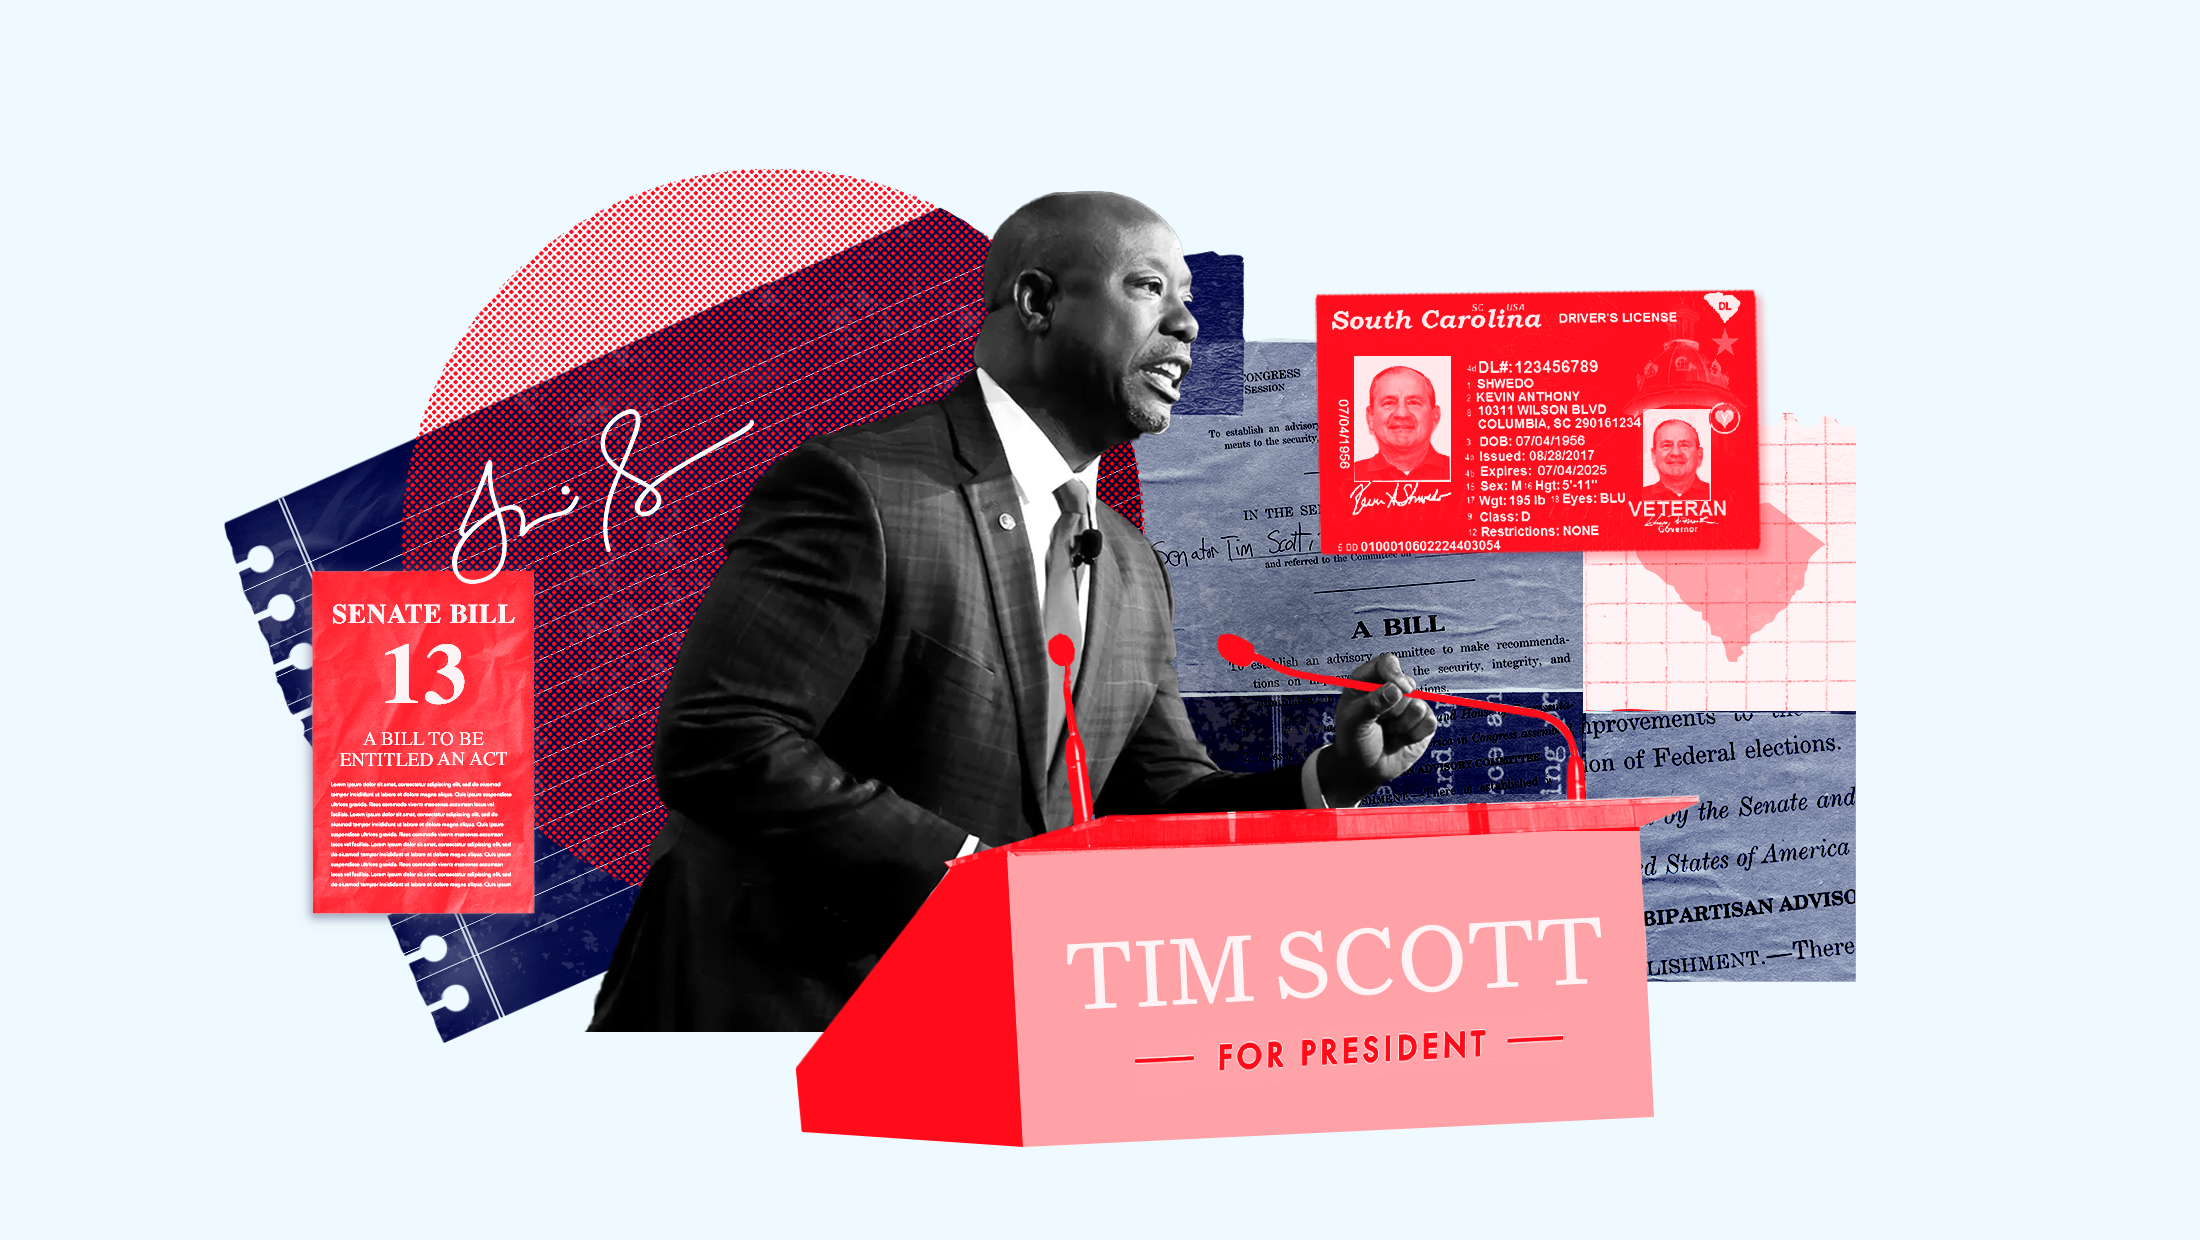 Tim Scott standing before a podium that says "Tim Scott for President" surrounded by cut out images of his signature, a South Carolina ID, and the text of Senate Bill 13.